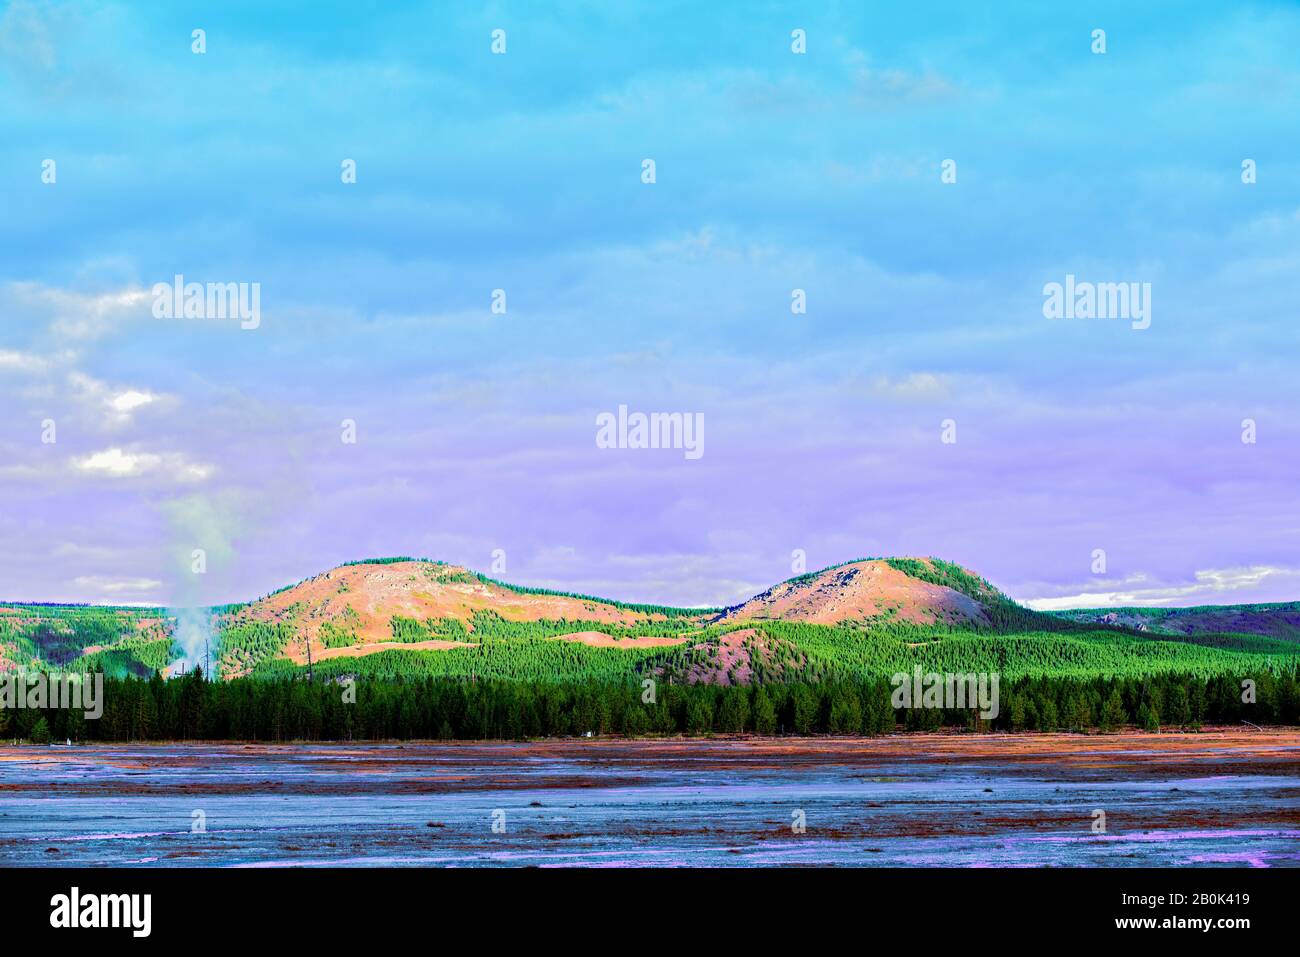 Green forest with smok rising up out of the forest with mountains beyond under purple and blue skies. Stock Photo